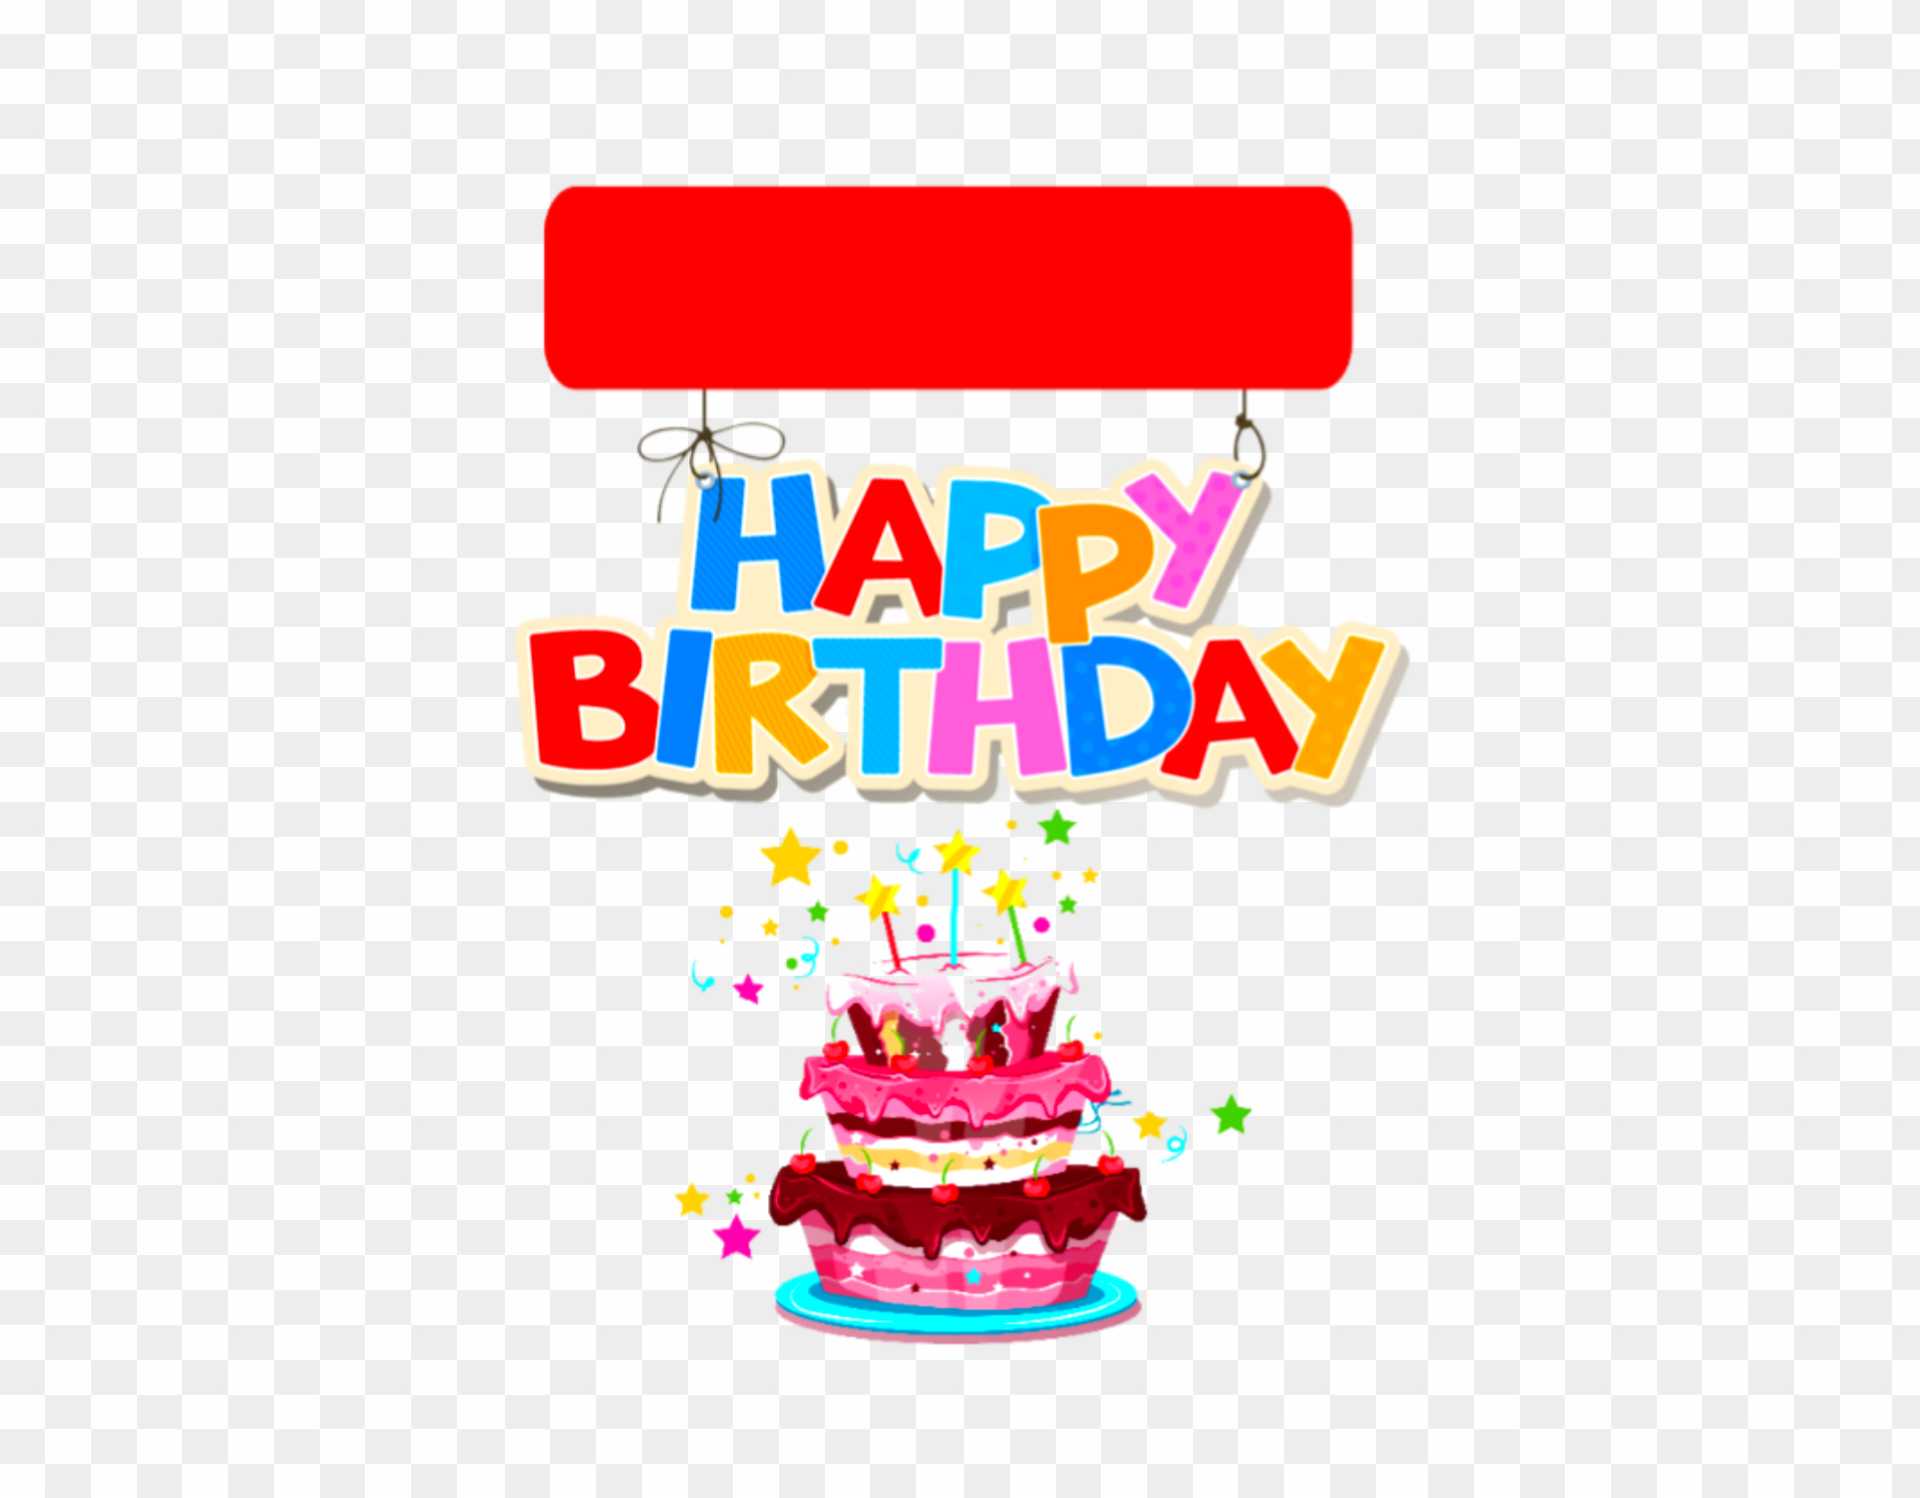 Happy birthday with date box png images